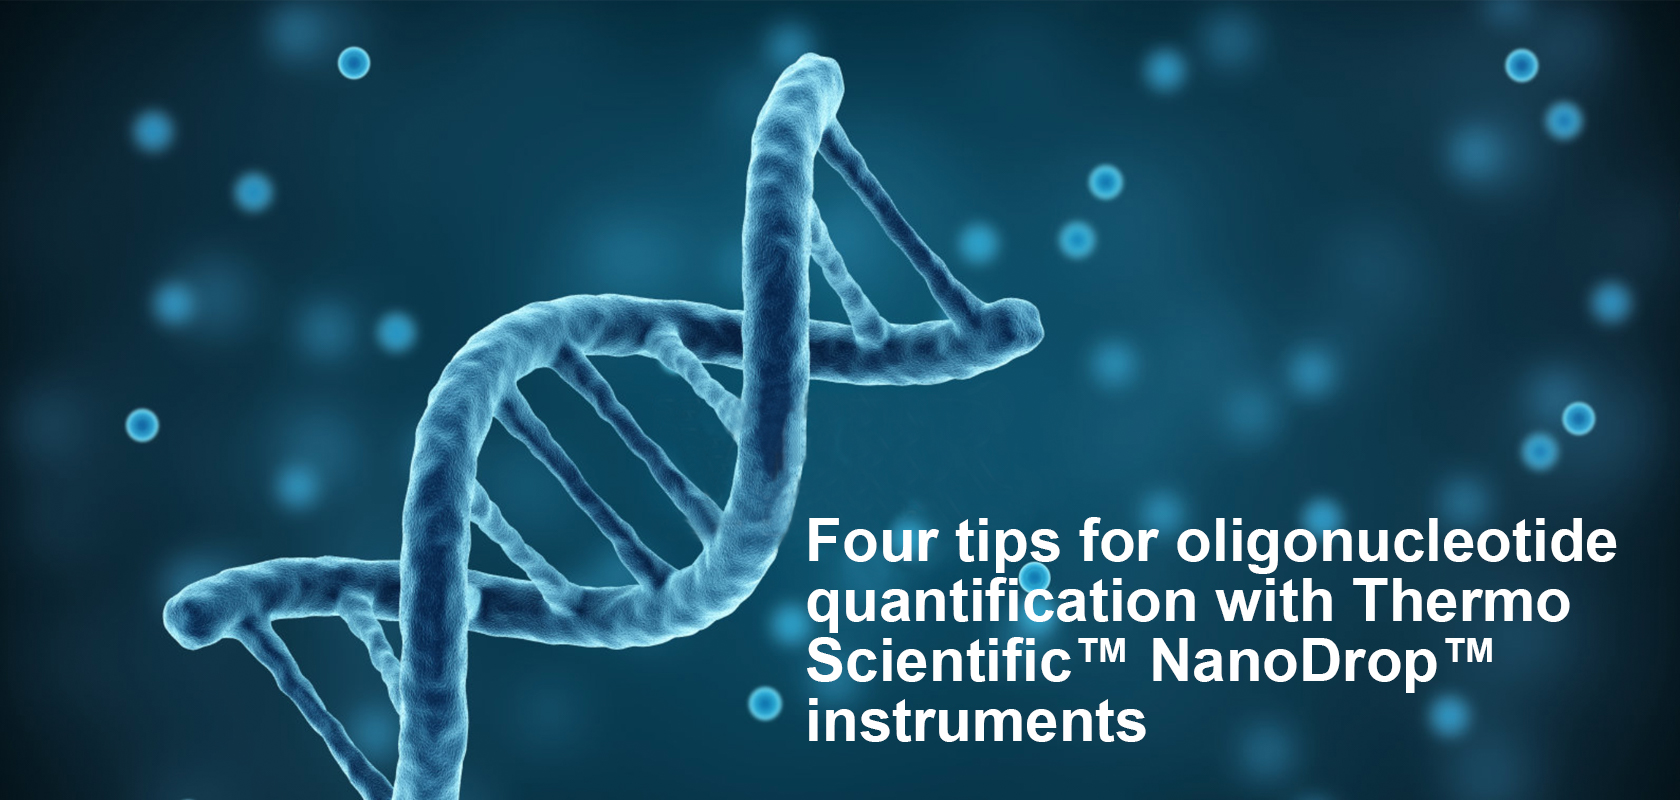 Four tips for oligonucleotide quantification with Thermo Scientific™ NanoDrop™ instruments